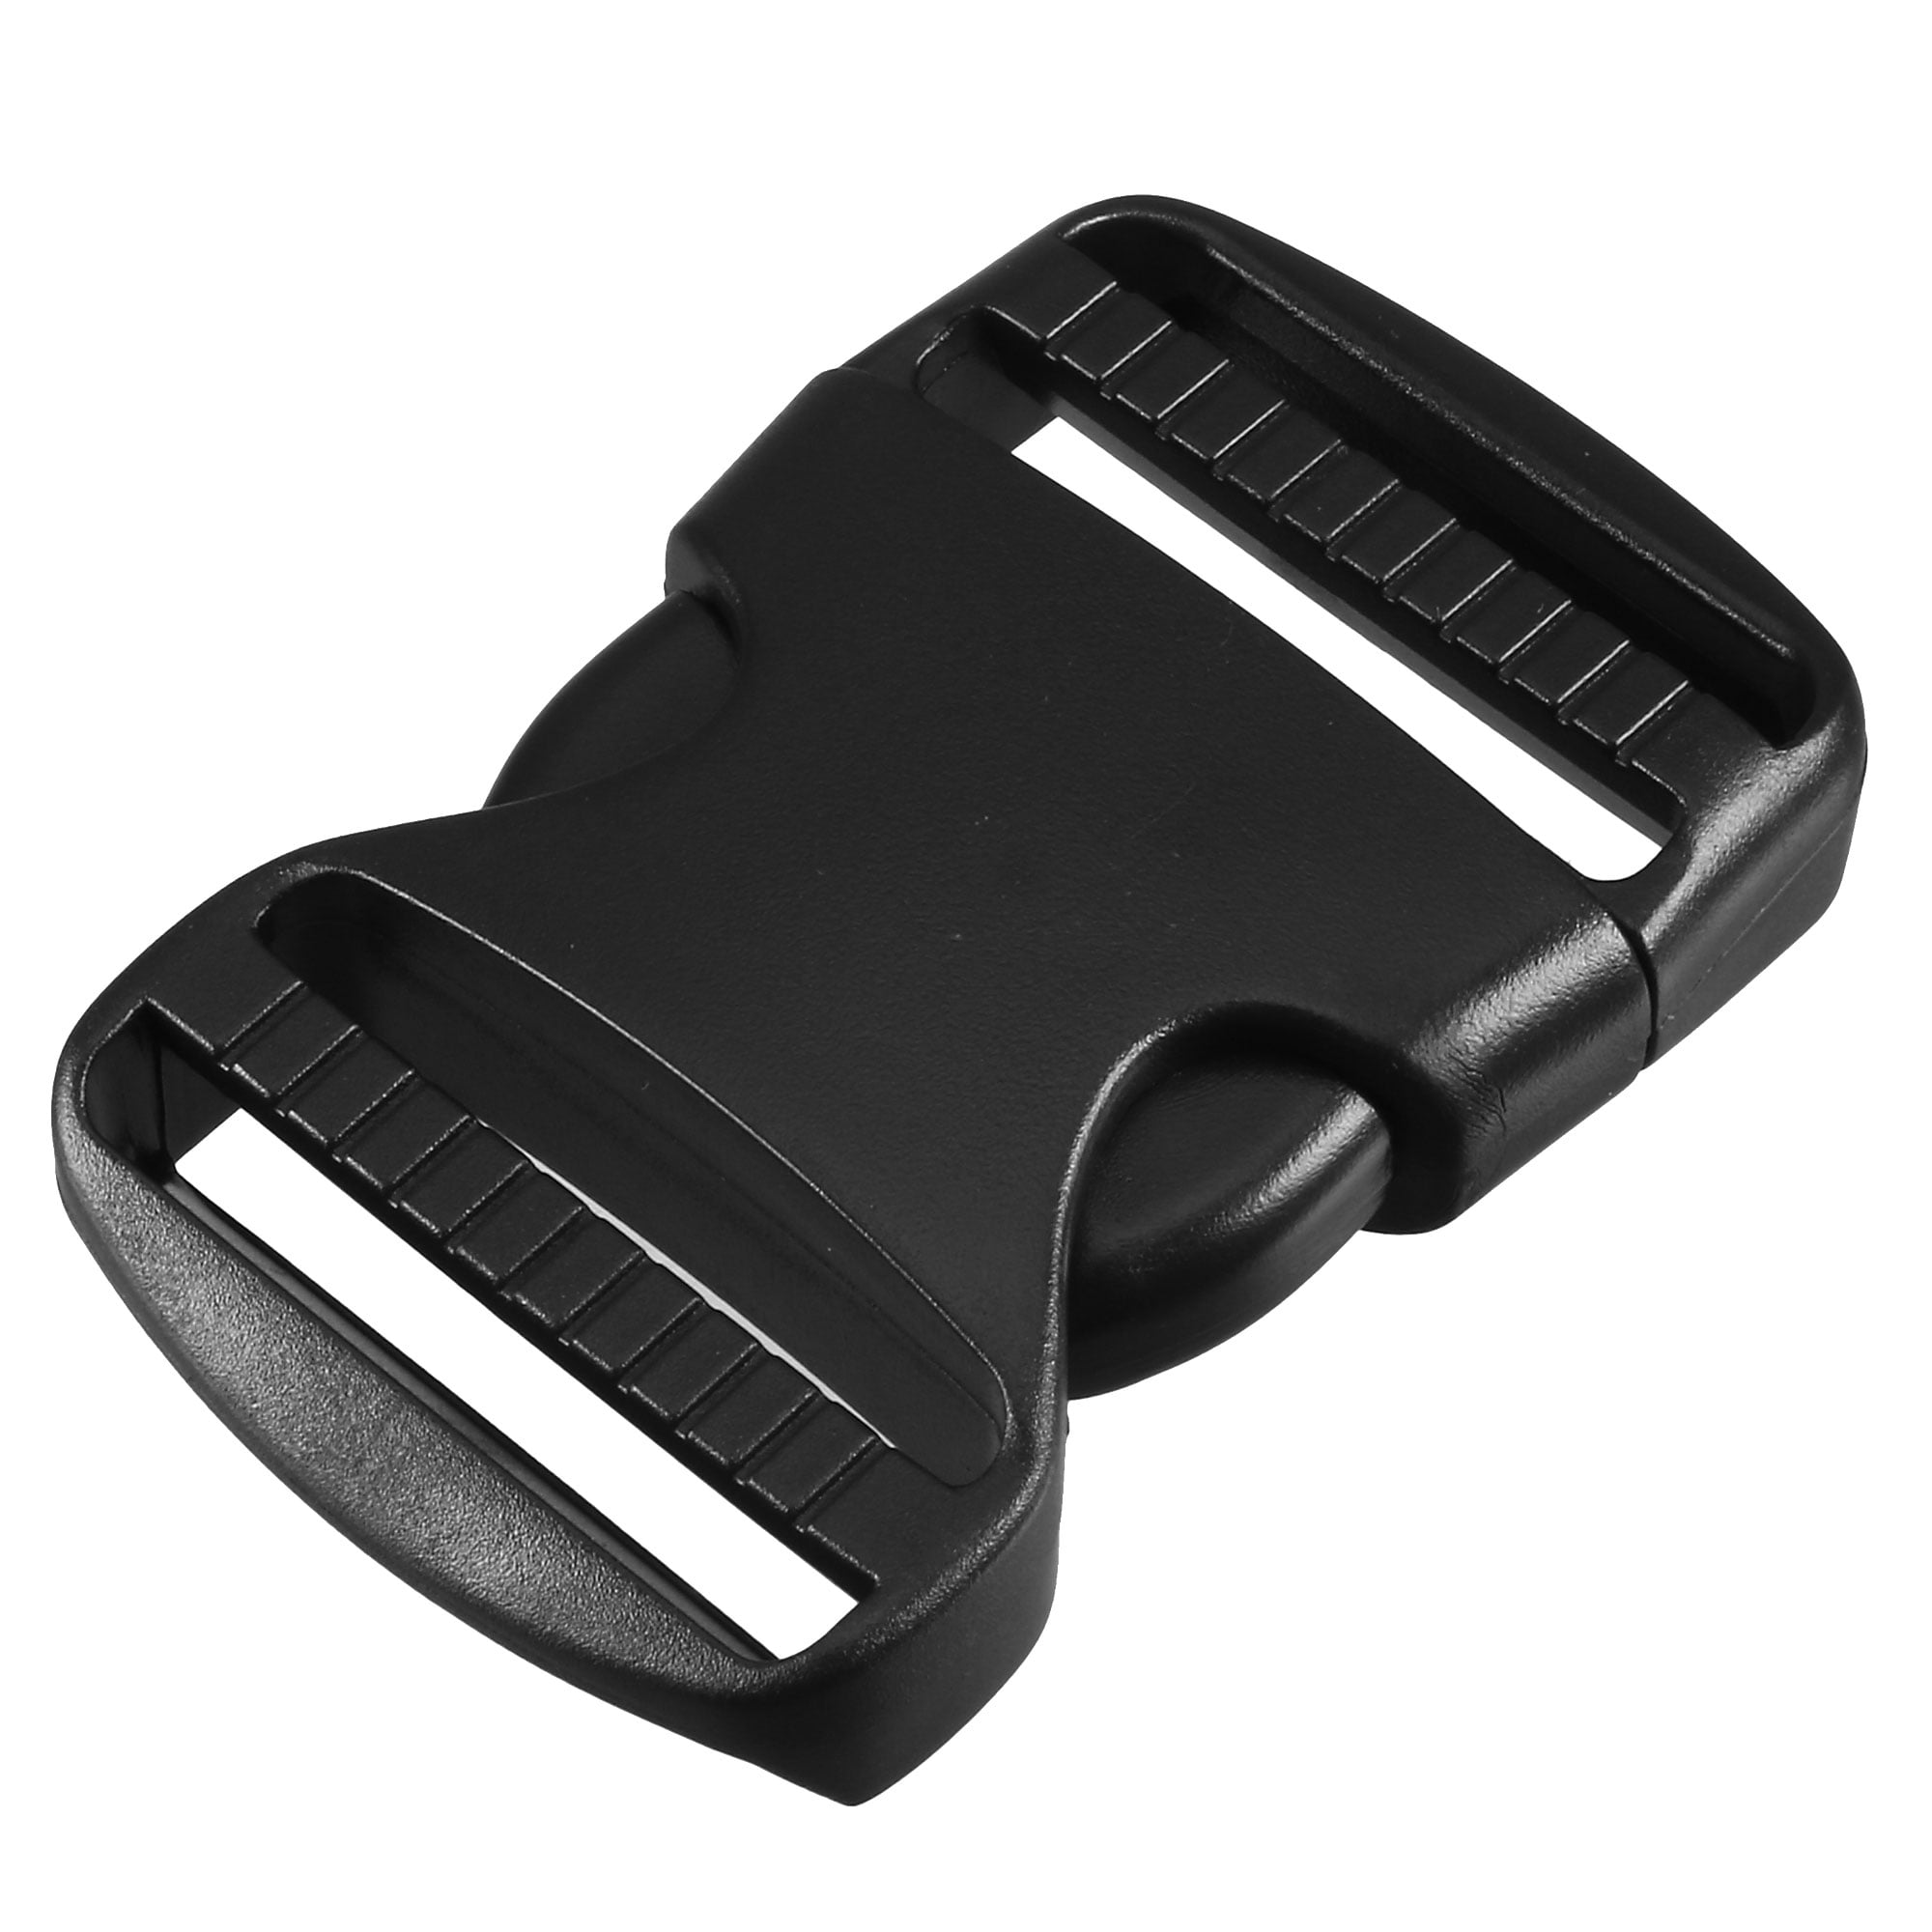 Uxcell Strap 1 1/2 Spare Parts Plastic Side Quick Release Buckle